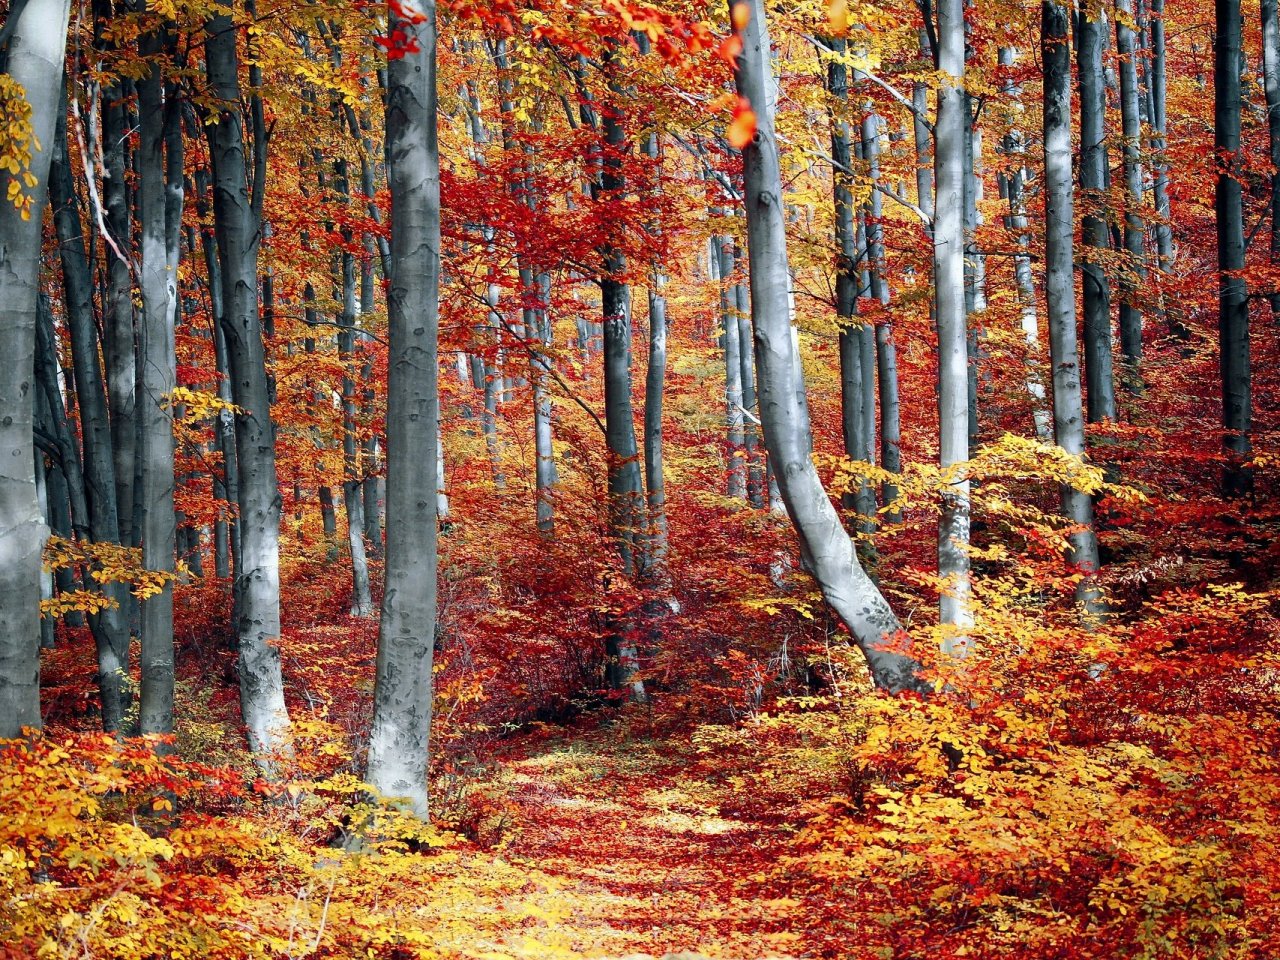 Autumn forest jigsaw puzzle